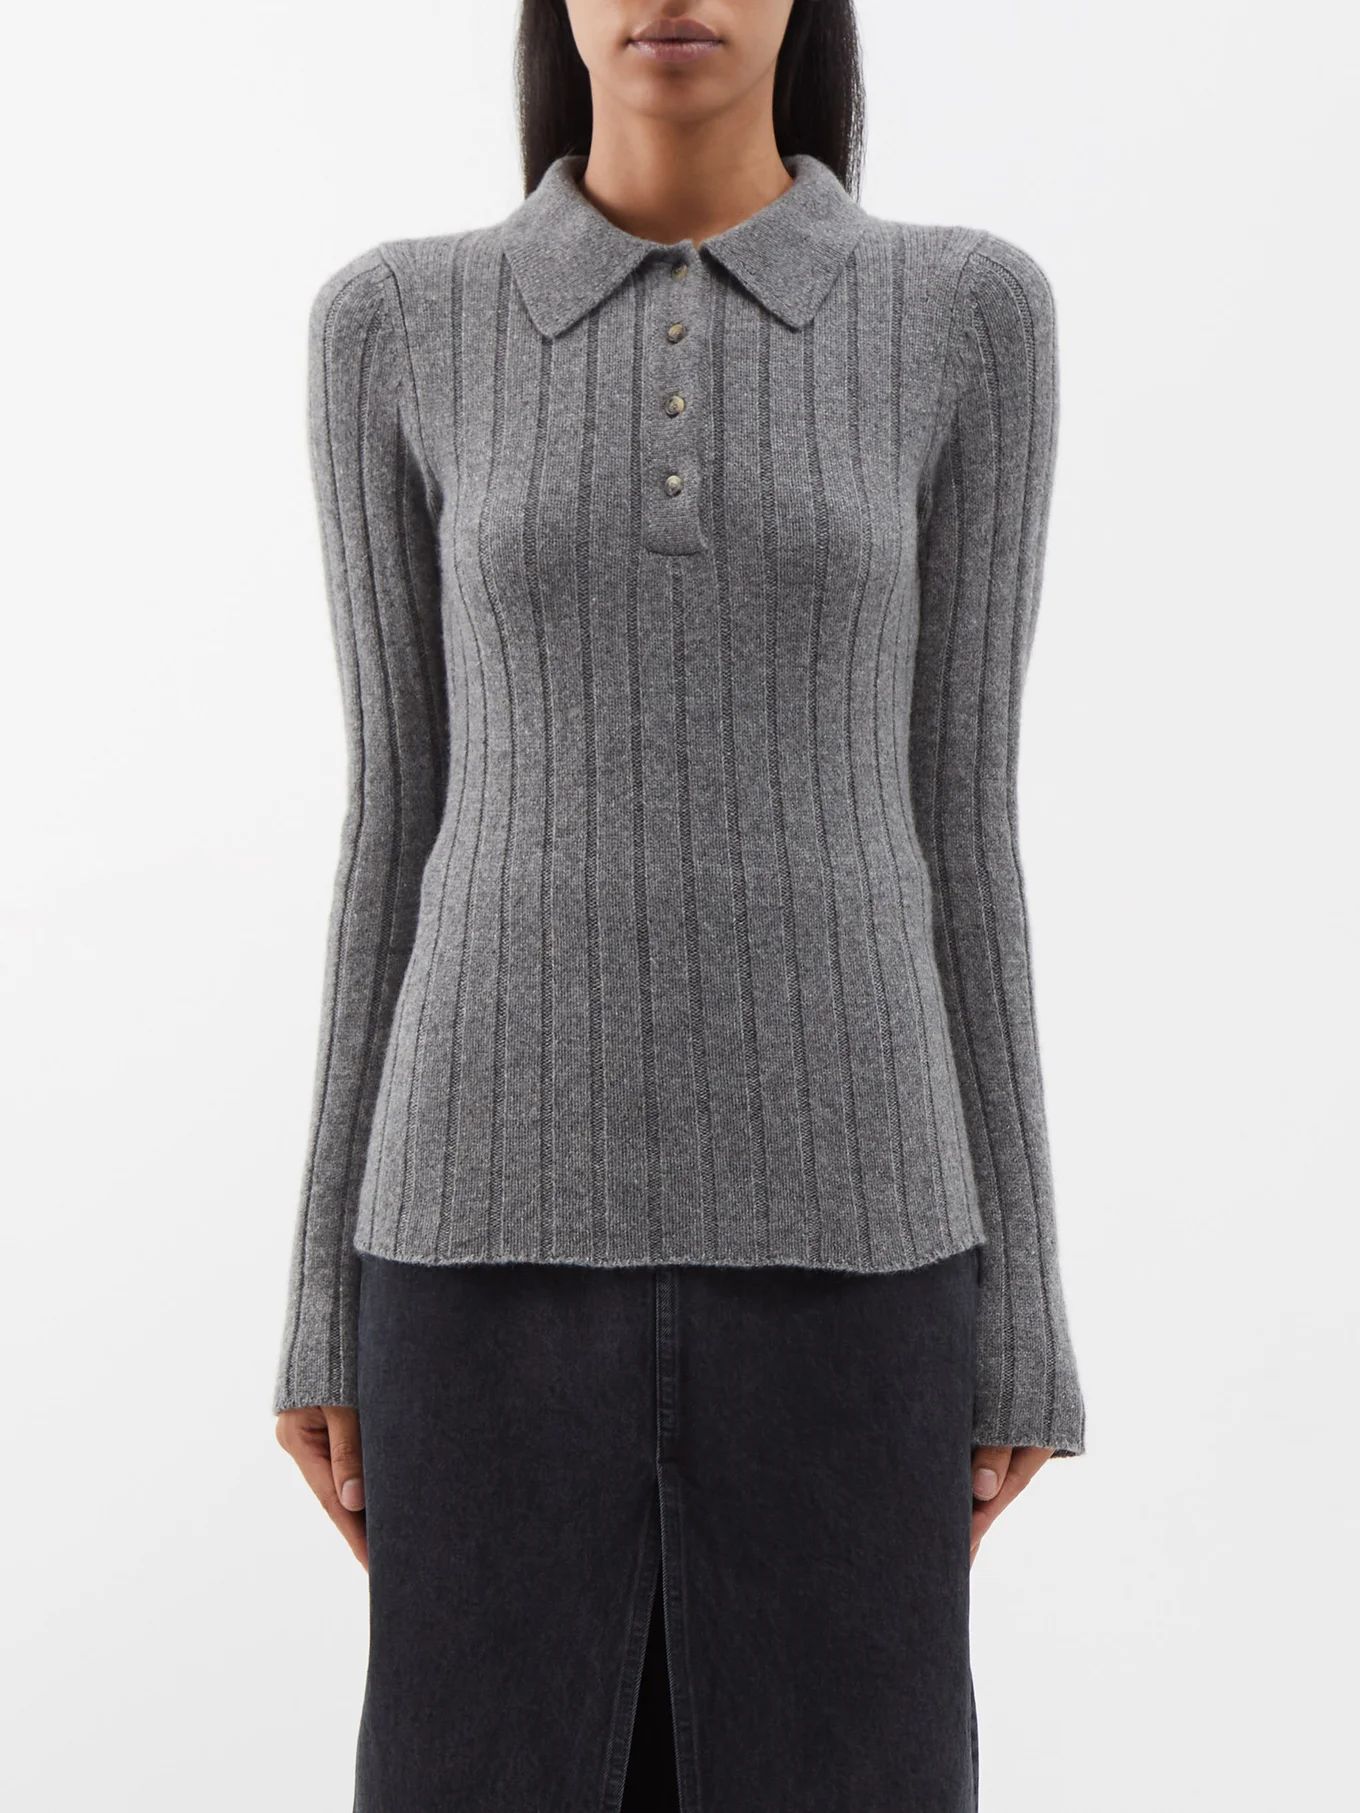 Hans ribbed cashmere sweater | Matches (US)